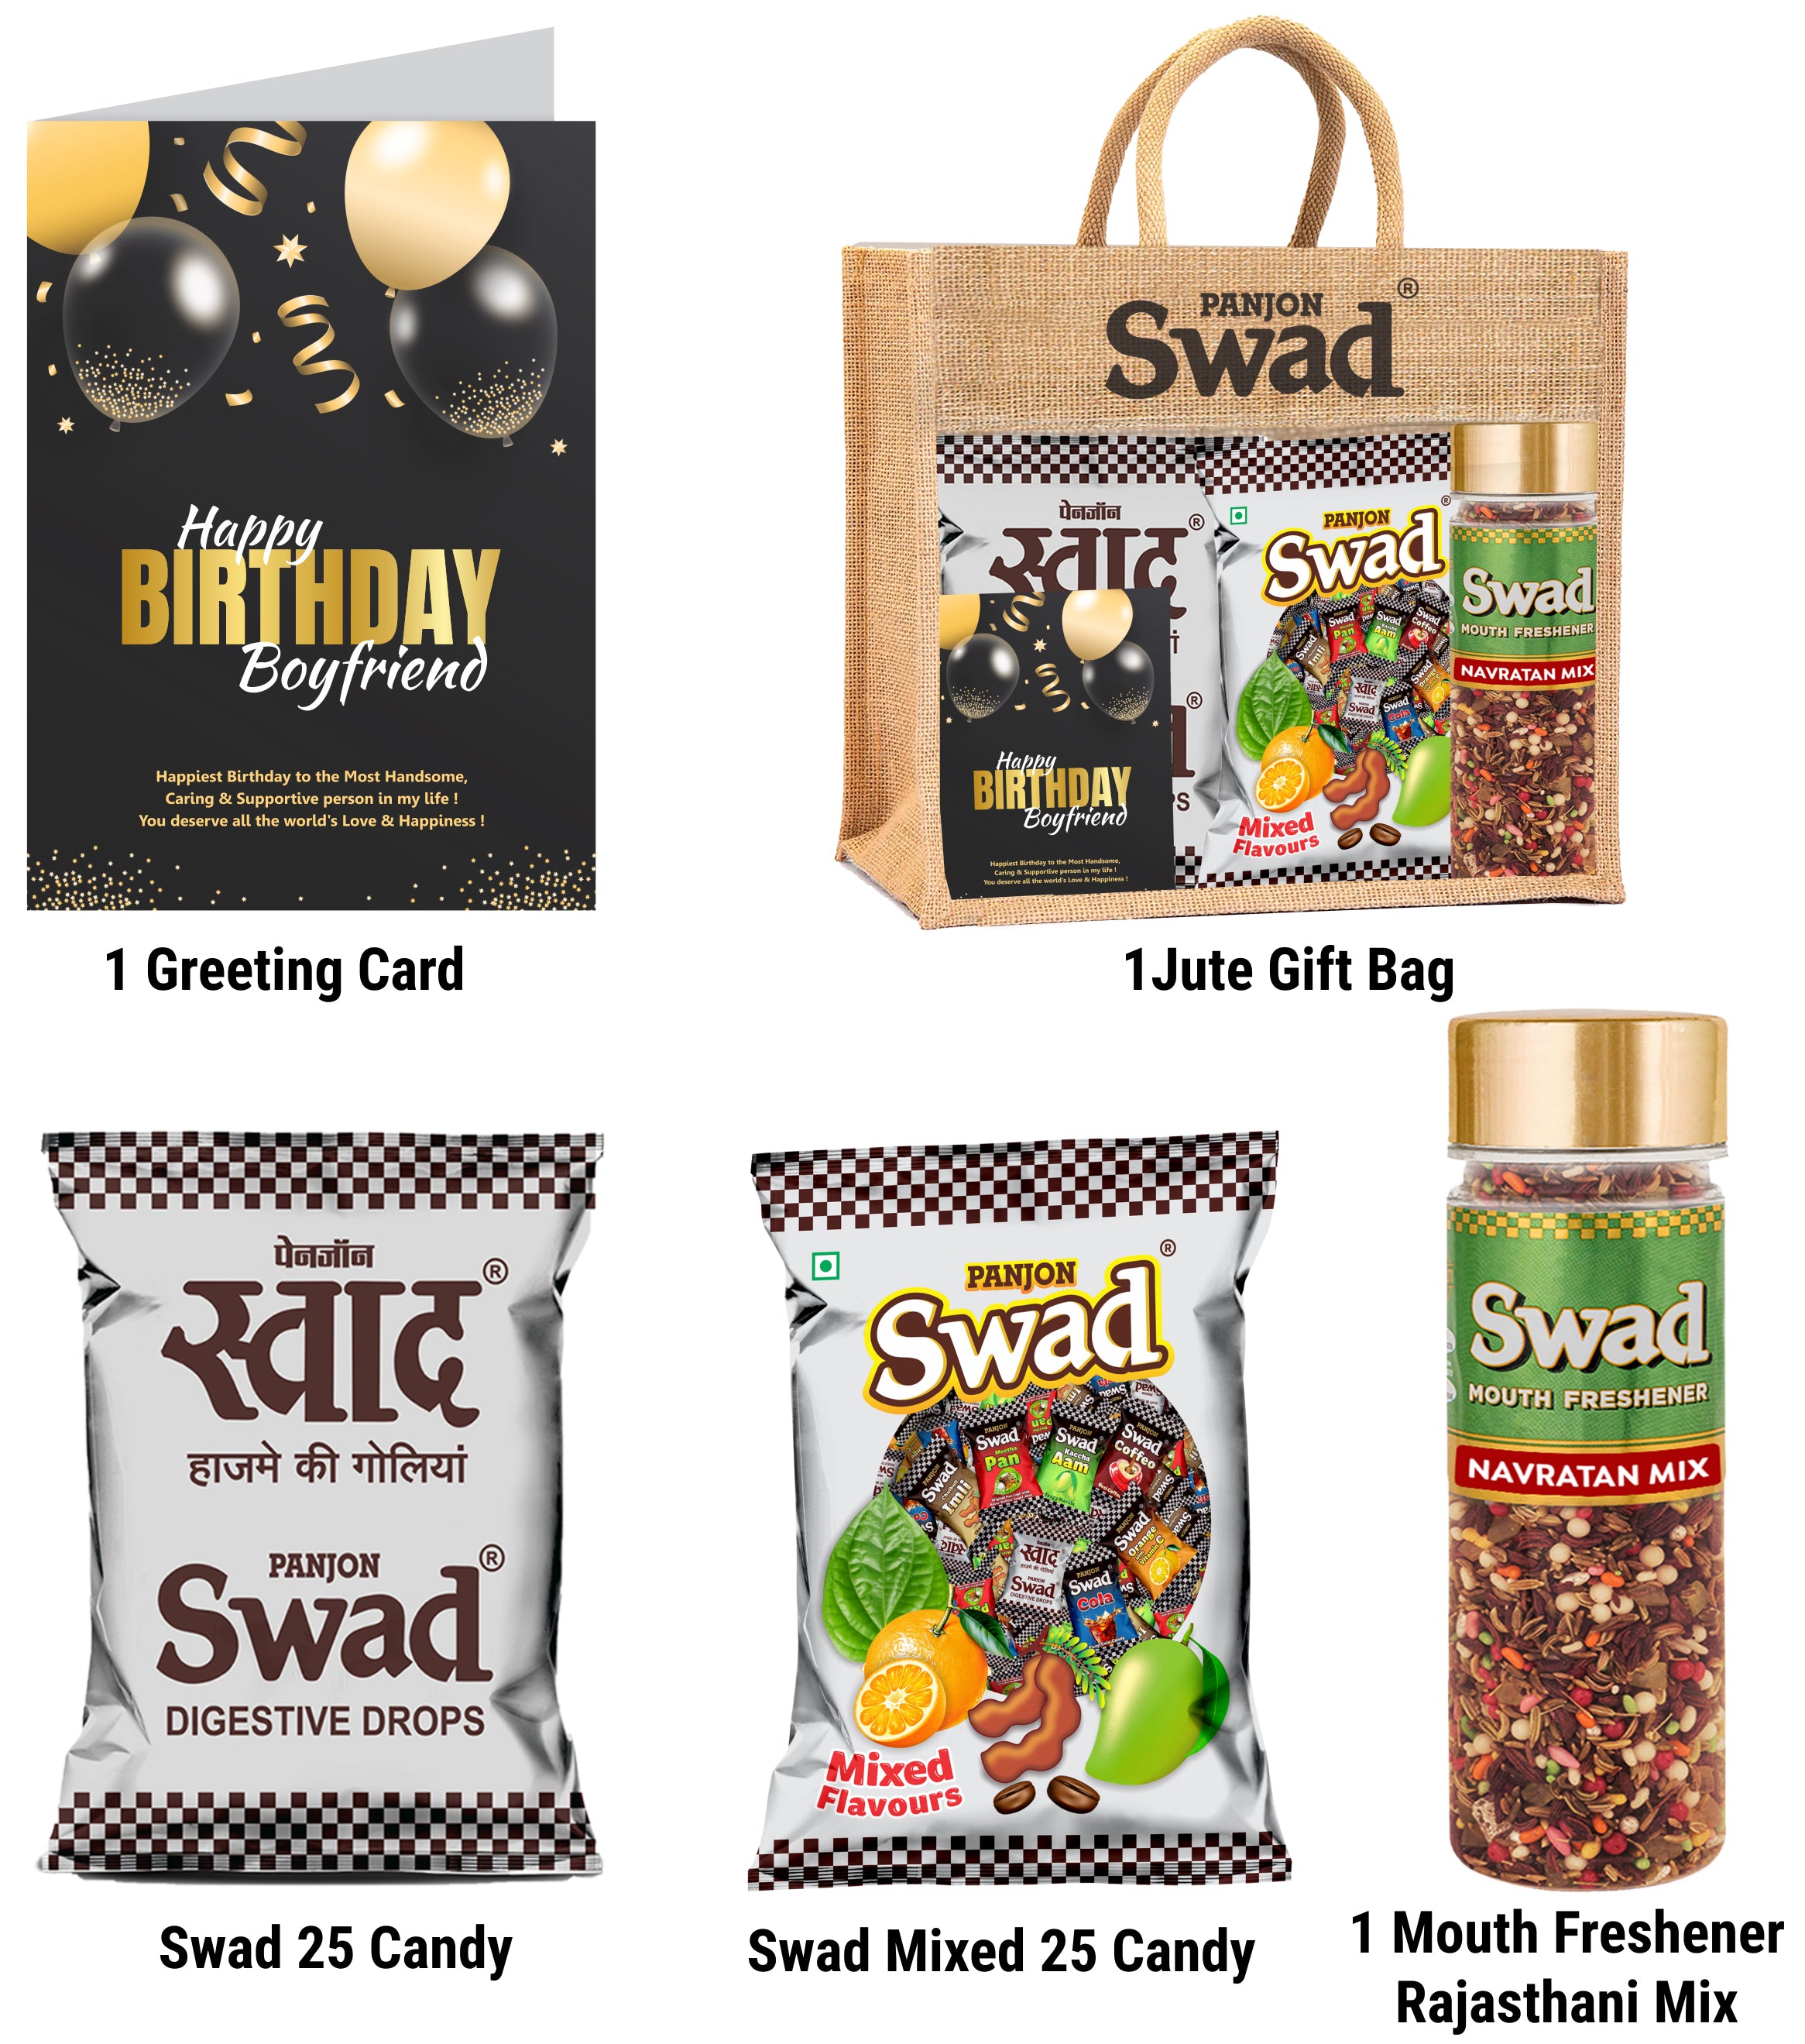 Swad Happy Birthday Boy friend Gift with Card (25 Swad Candy, 25 Mixed Toffee, Navratan Mix Mukhwas) in Jute Bag